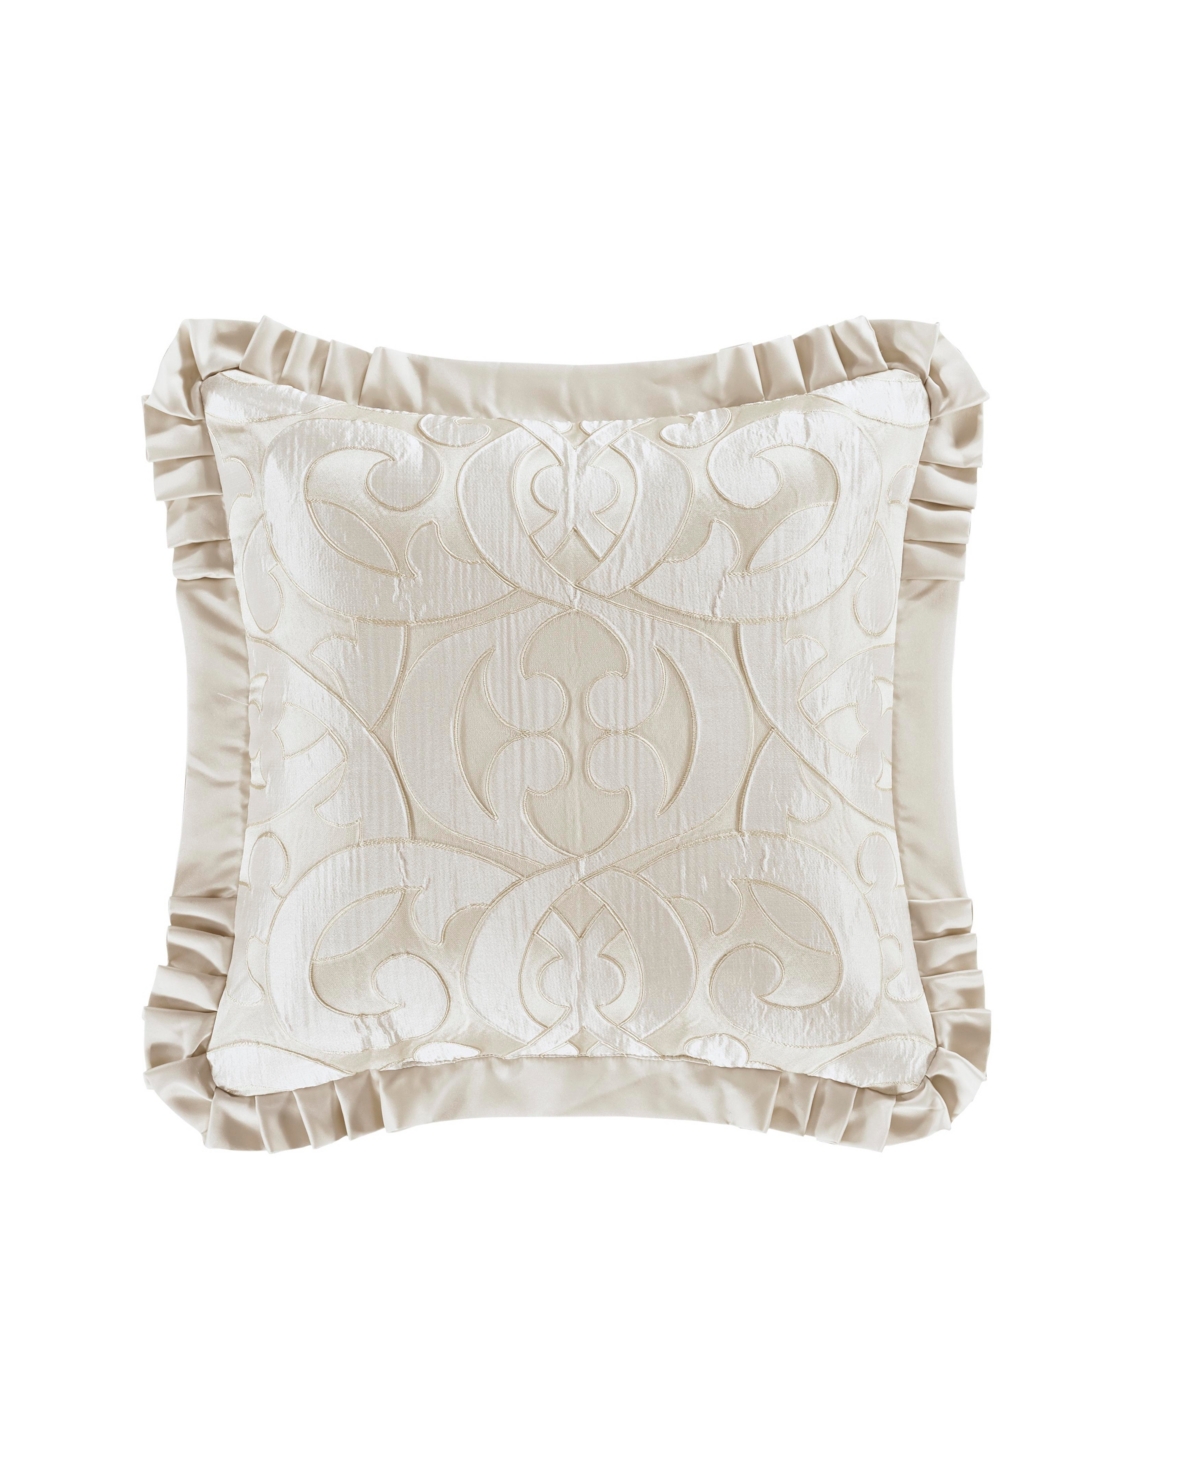 J Queen New York La Boheme Square Embellished Decorative Throw Pillow, 20" X 20" Bedding In Ivory